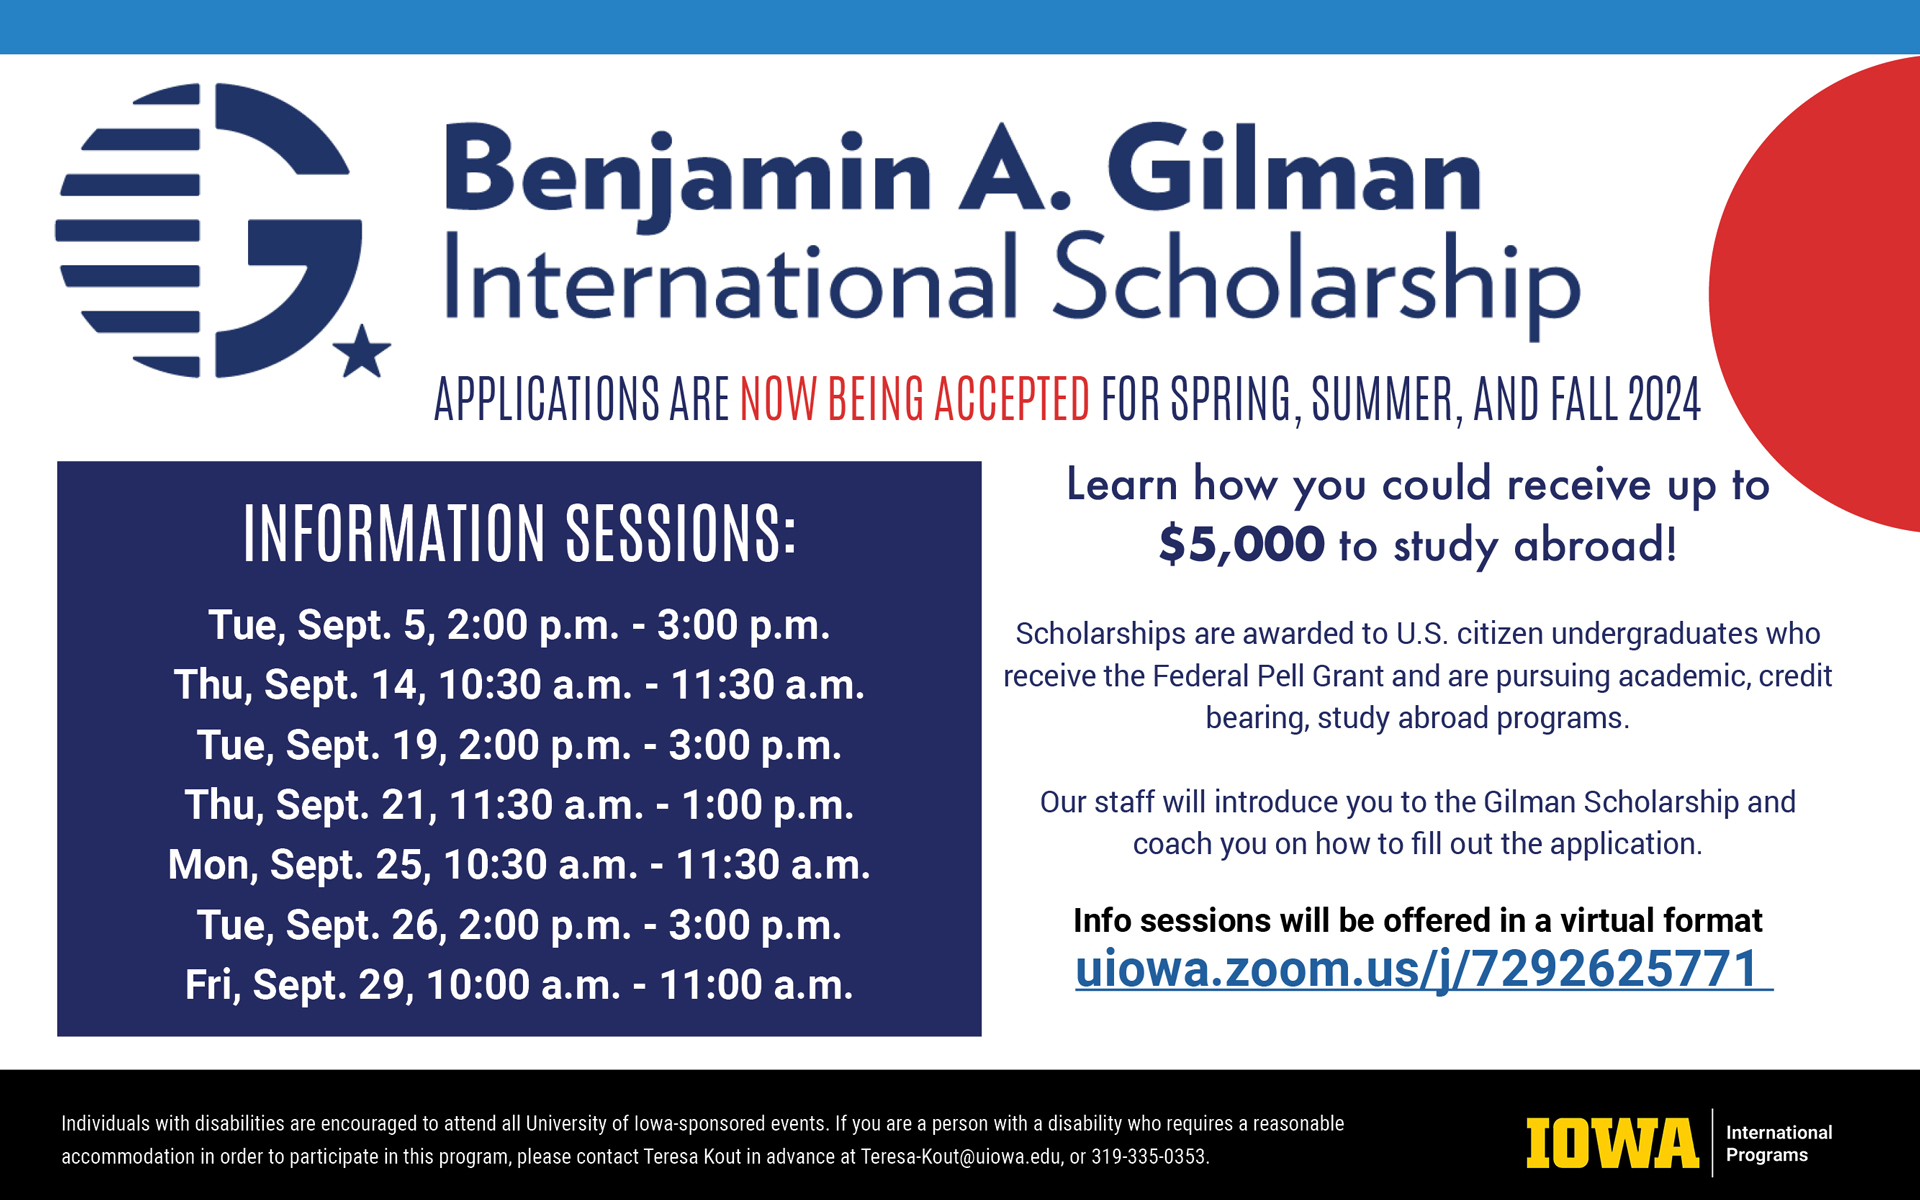 Benjamin A. Gilman International Scholarship: Receive up to $5,000 to study abroad!